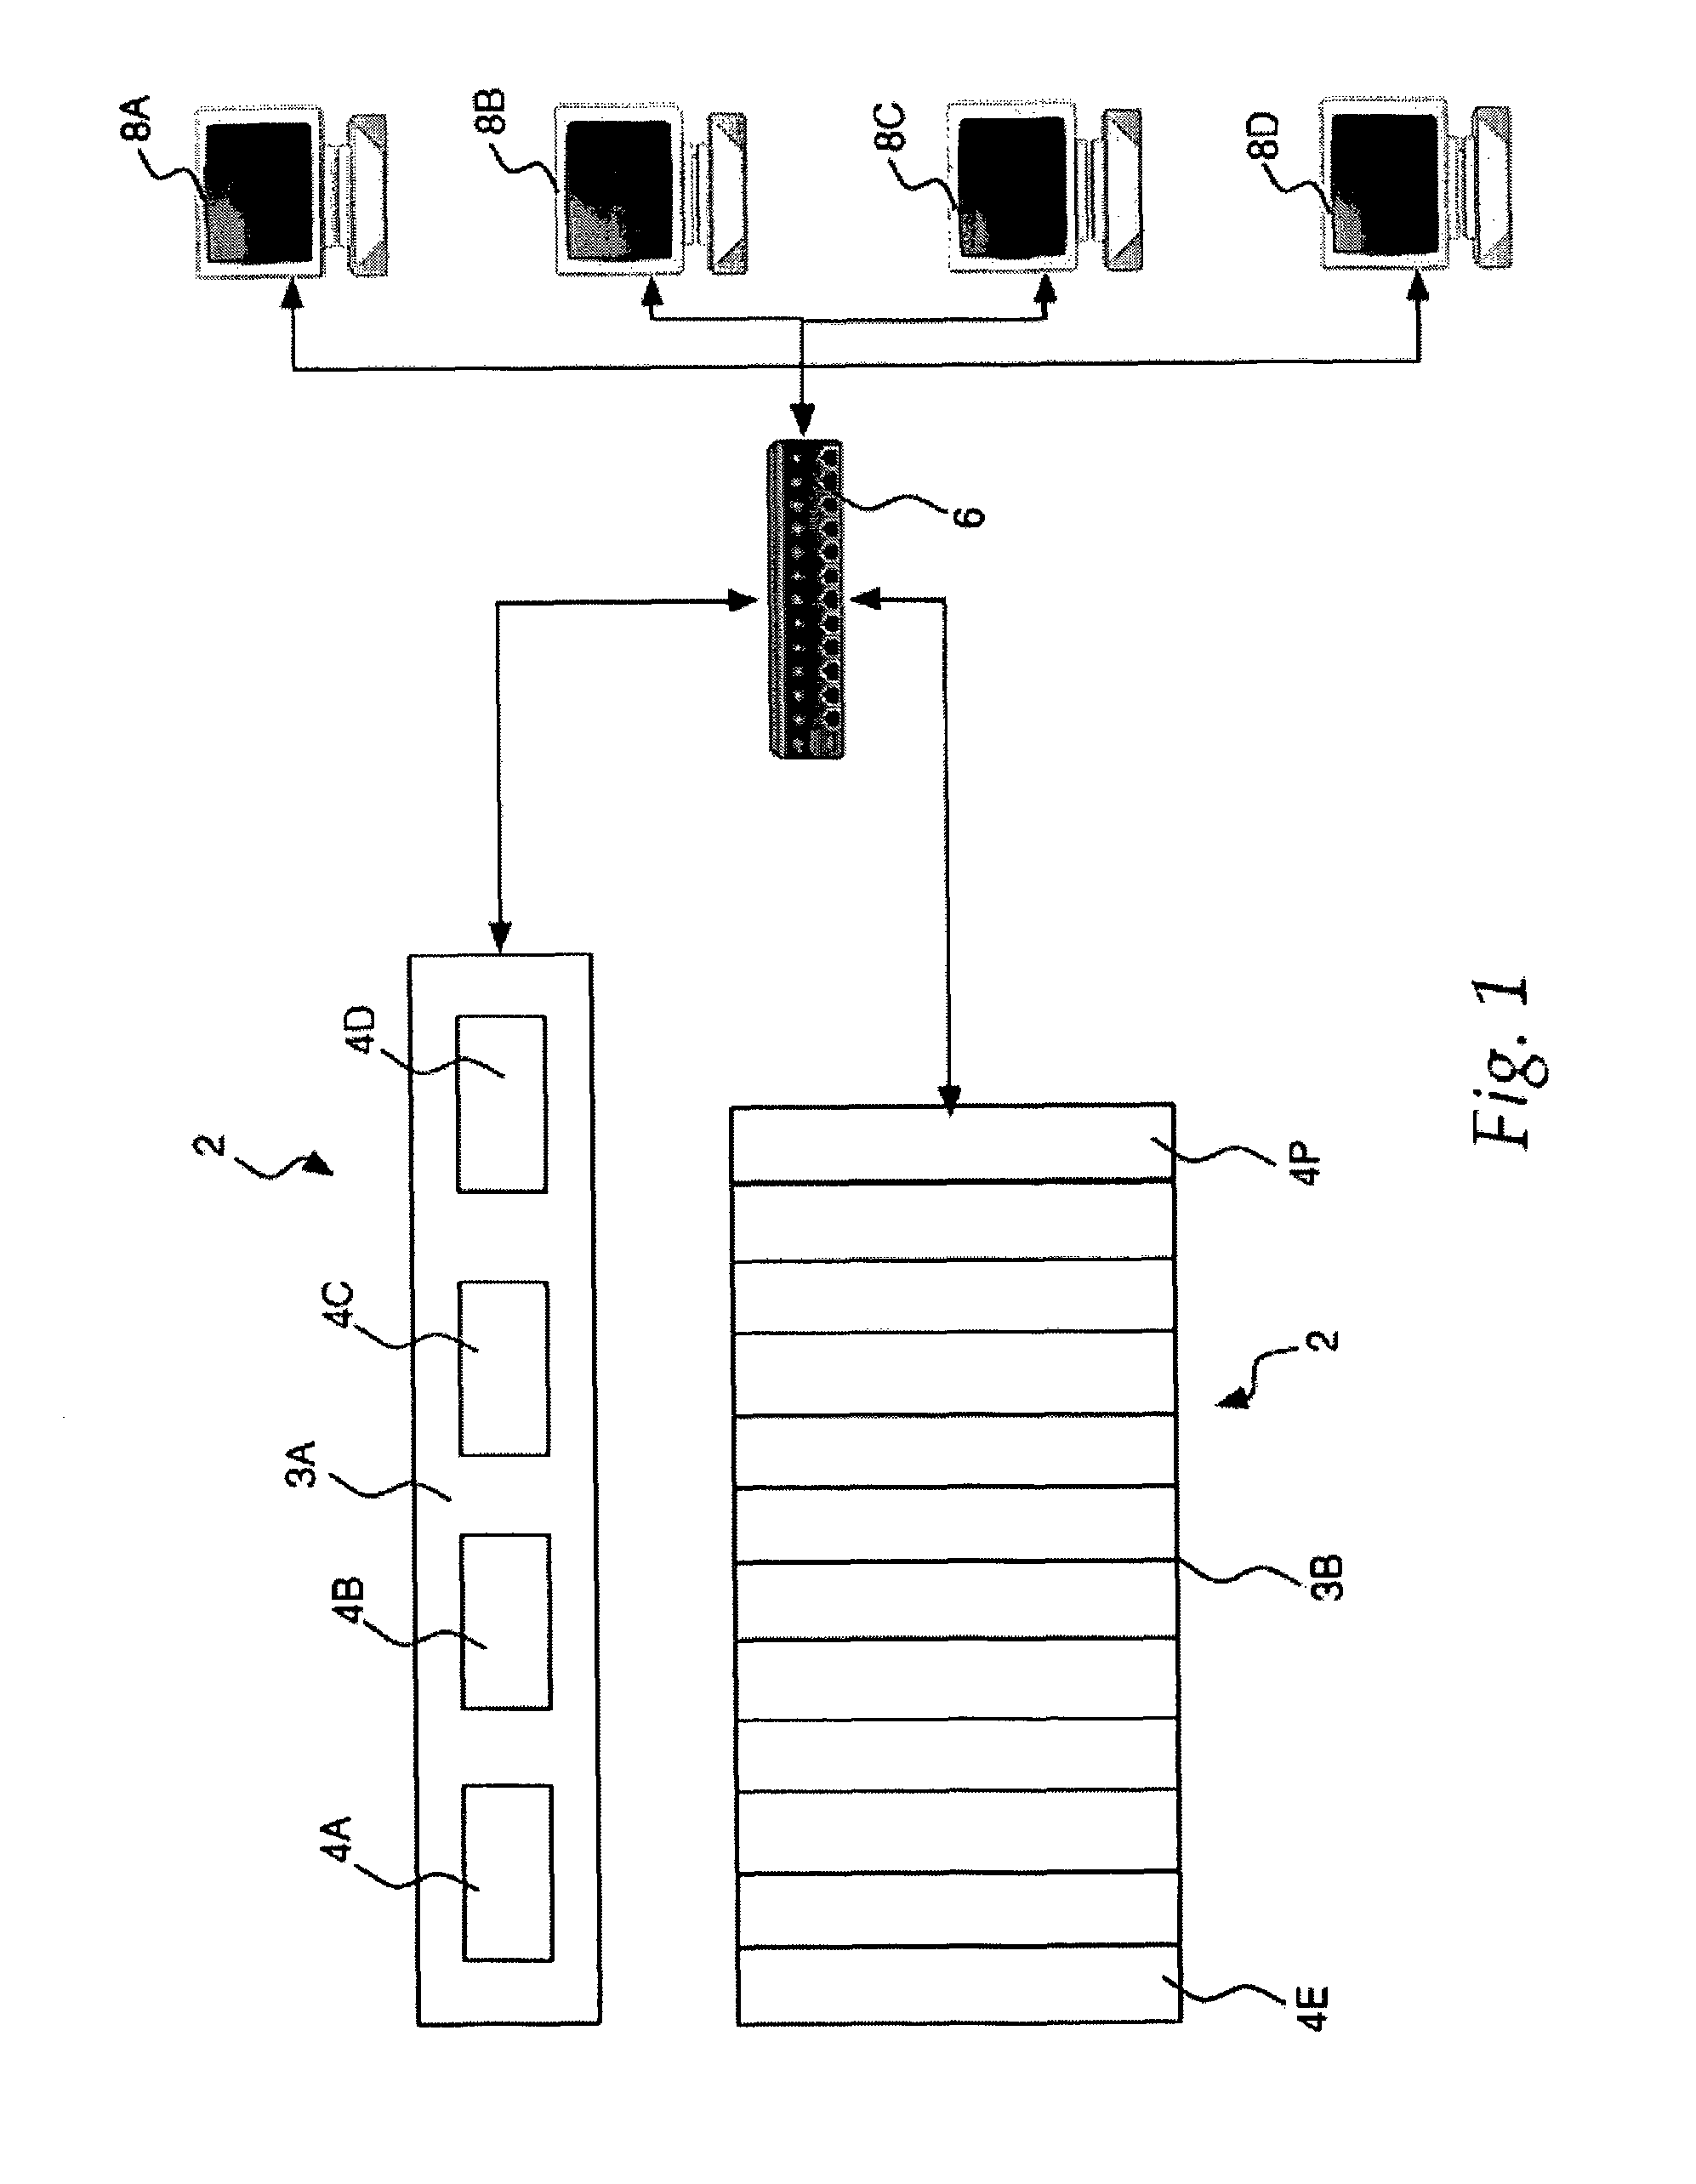 Method, system, apparatus, and computer-readable medium for improving disk array performance